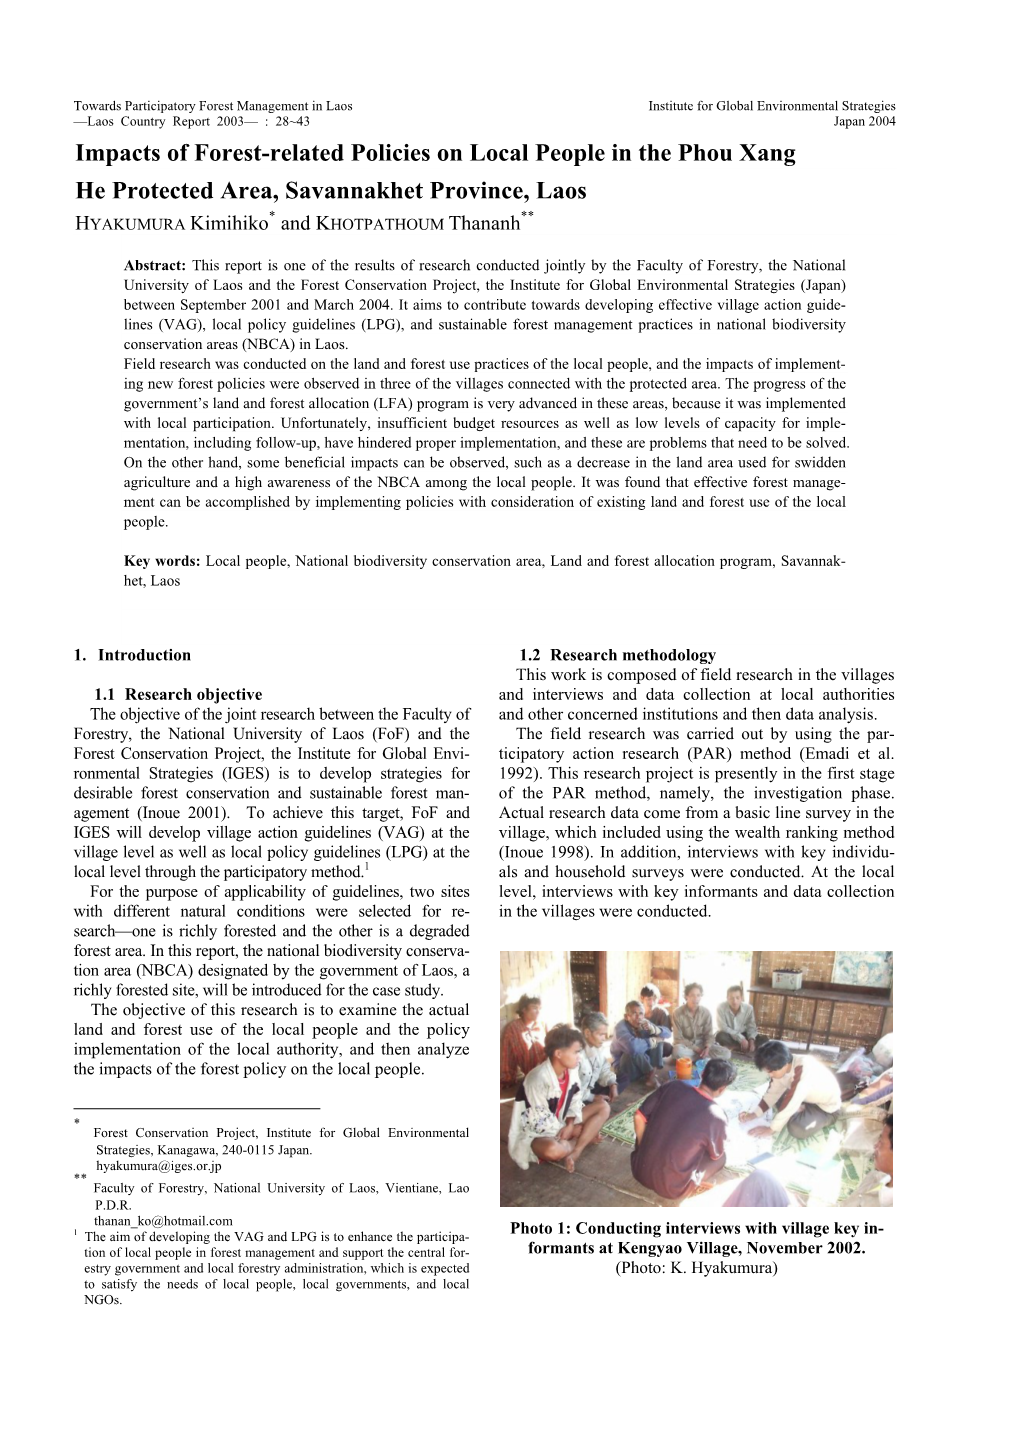 Impacts of Forest-Related Policies on Local People in the Phou Xang He Protected Area, Savannakhet Province, Laos * ** HYAKUMURA Kimihiko and KHOTPATHOUM Thananh